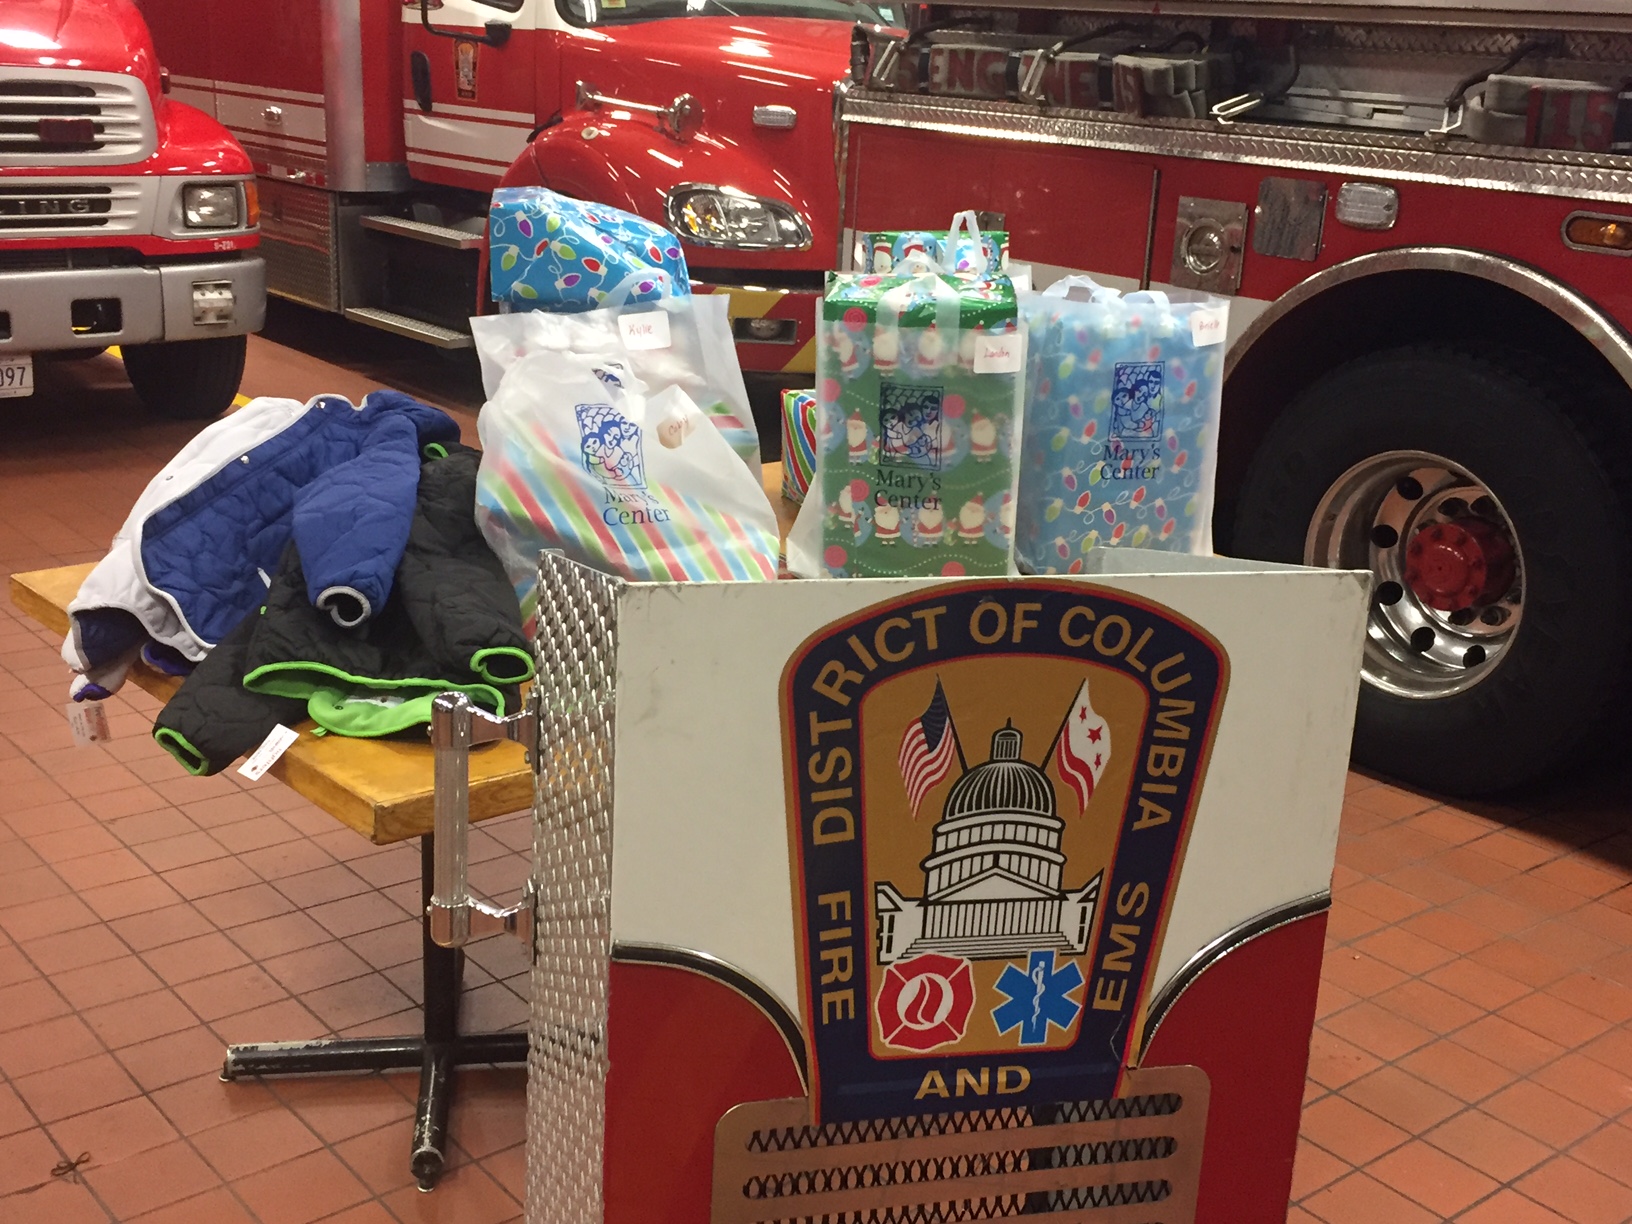 Photos of donated gifts at Engine 15